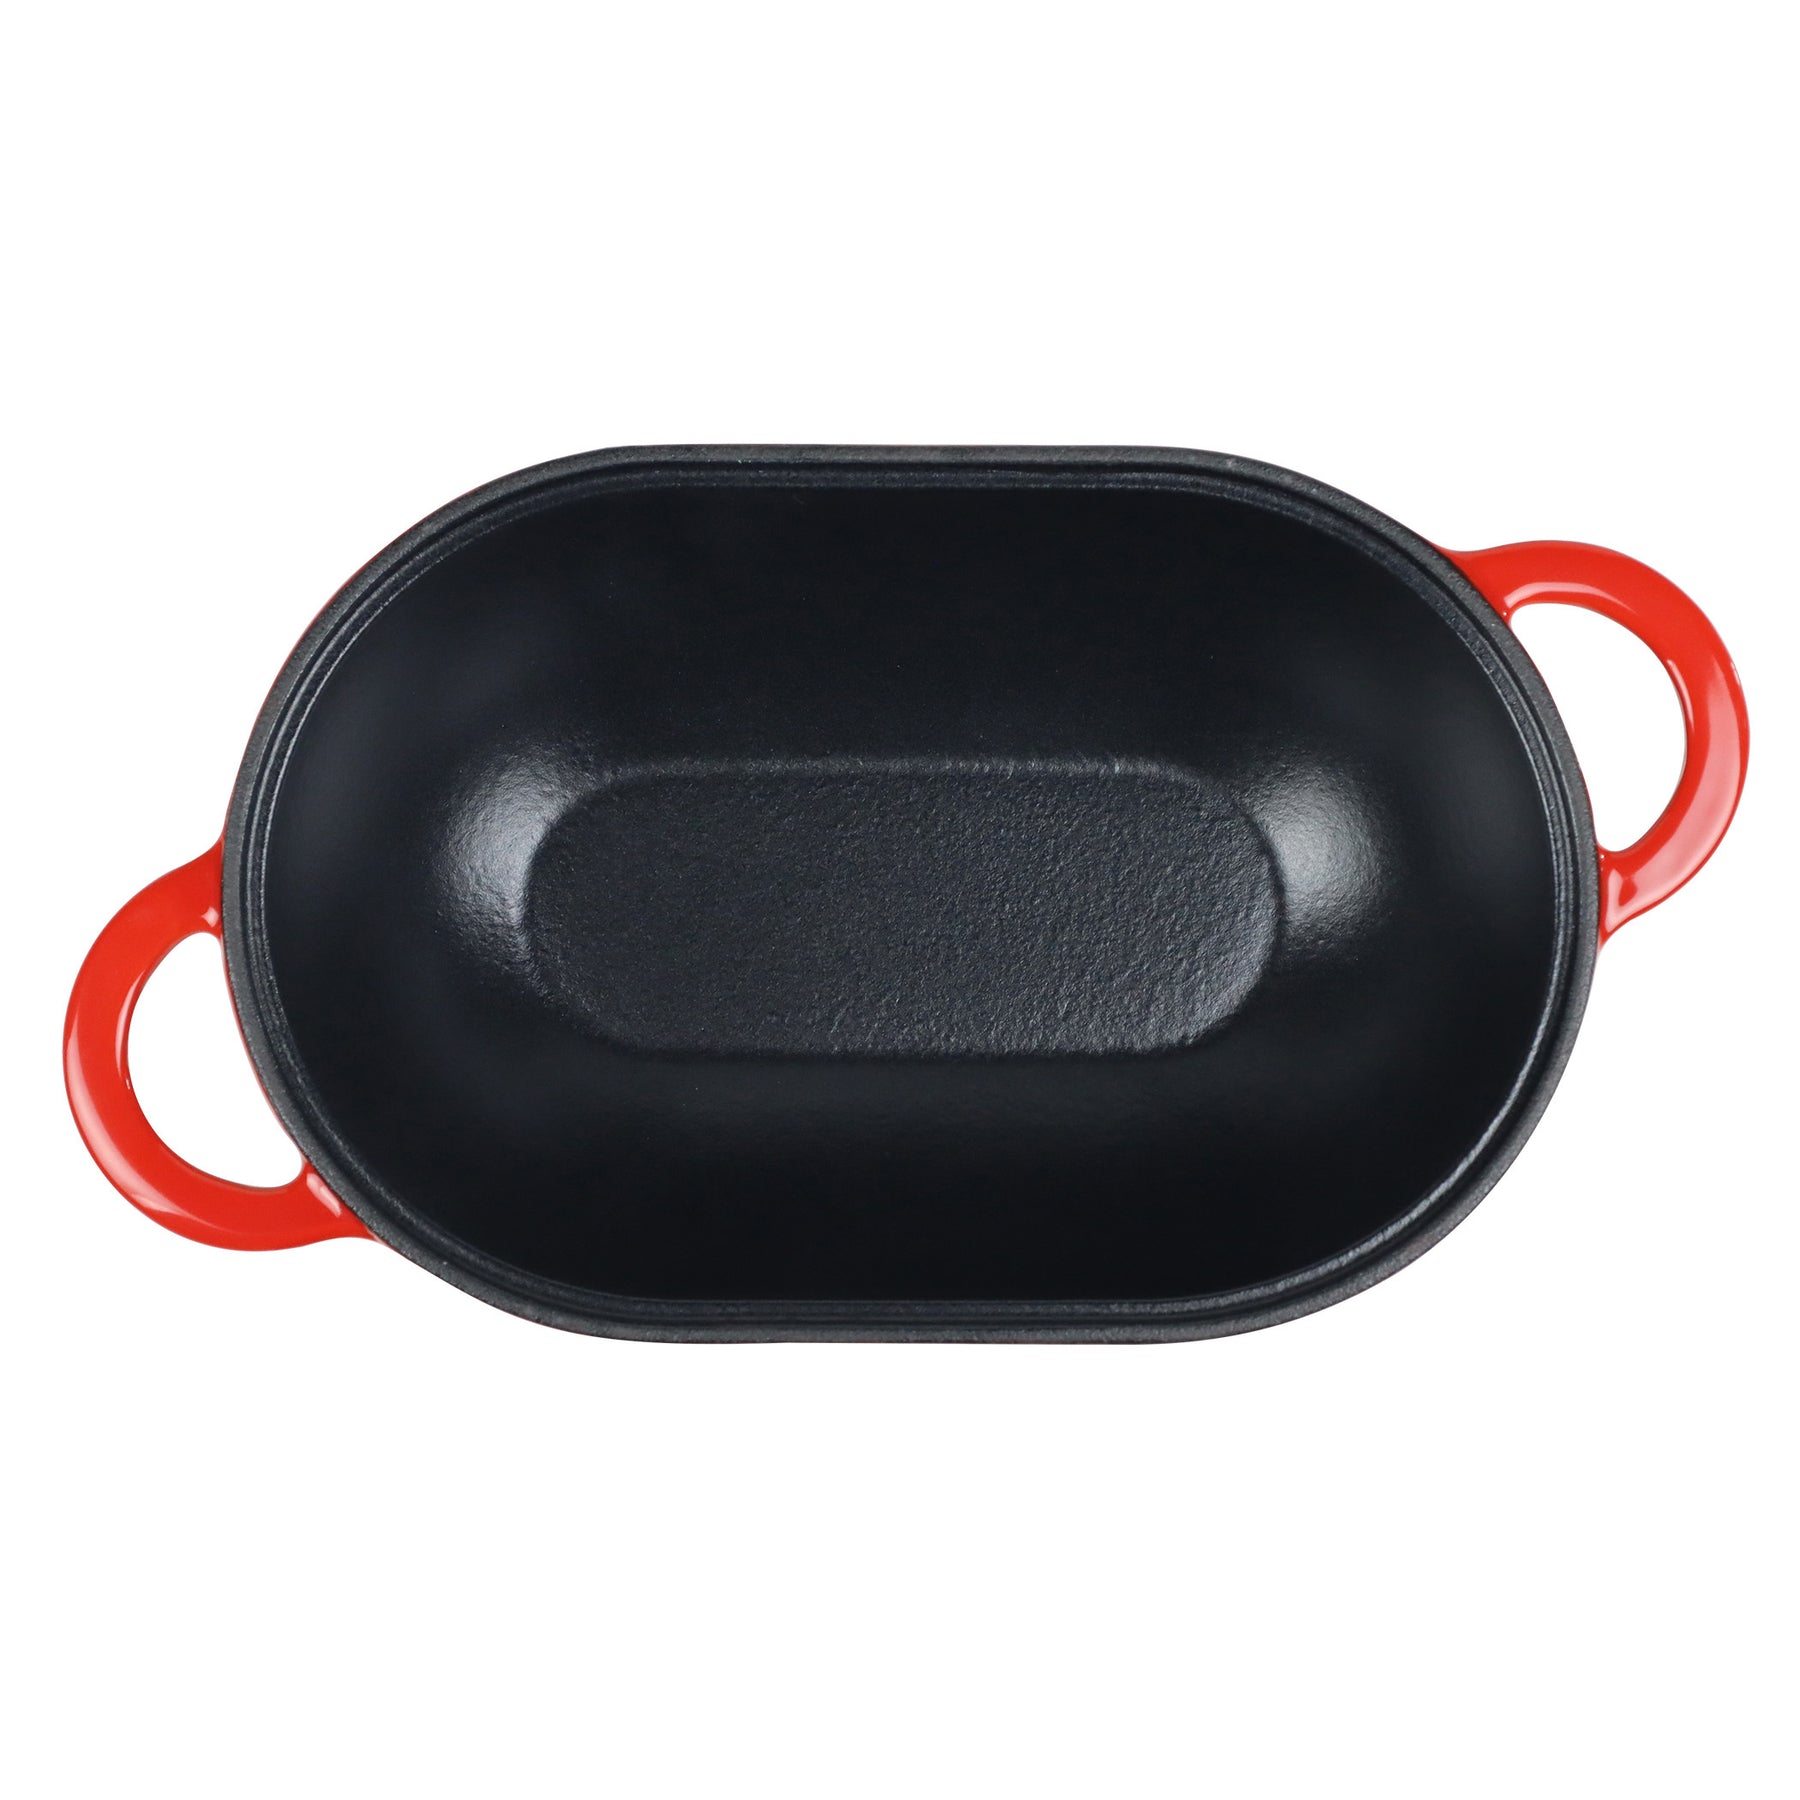 Enameled Cast Iron Bread Pan with Lid, Red, Oven Safe Form for Baking,  Artisan Bread Kit - Loaf Pan in 2023